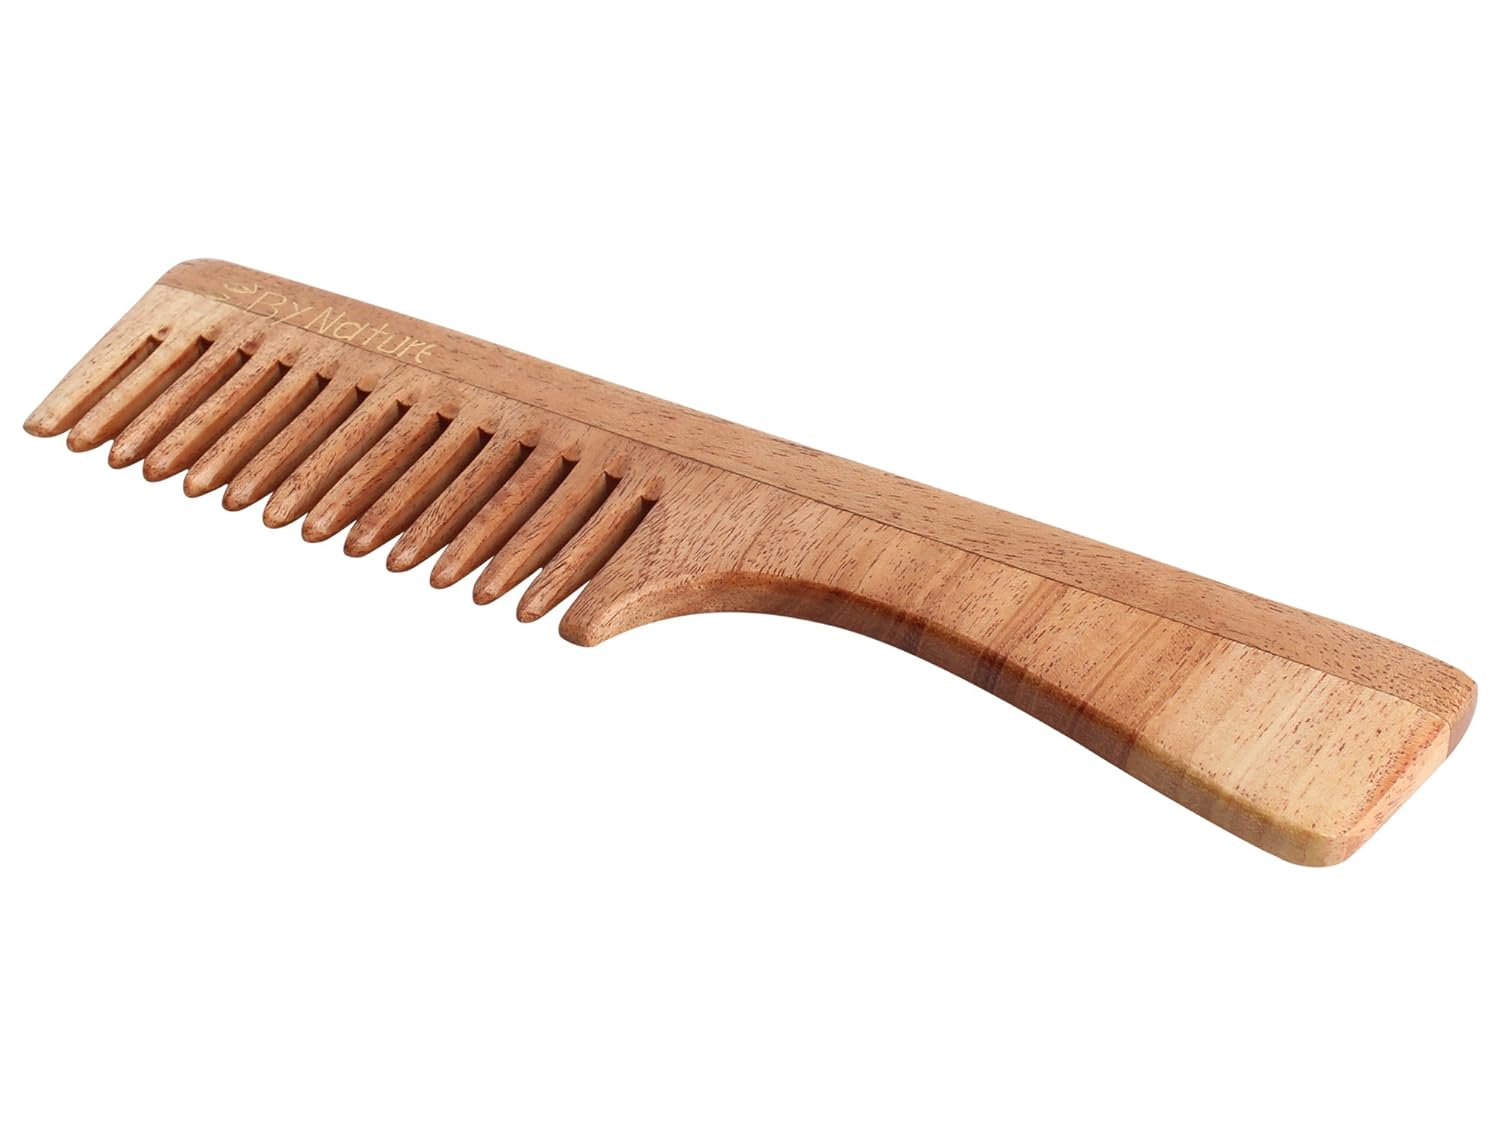 Etheric Pure Neem Wooden Comb -For Multi-Actions - Detangling, Frizz Control & Shine Suited For All Hair Types (Fine  Tooth) with Handle